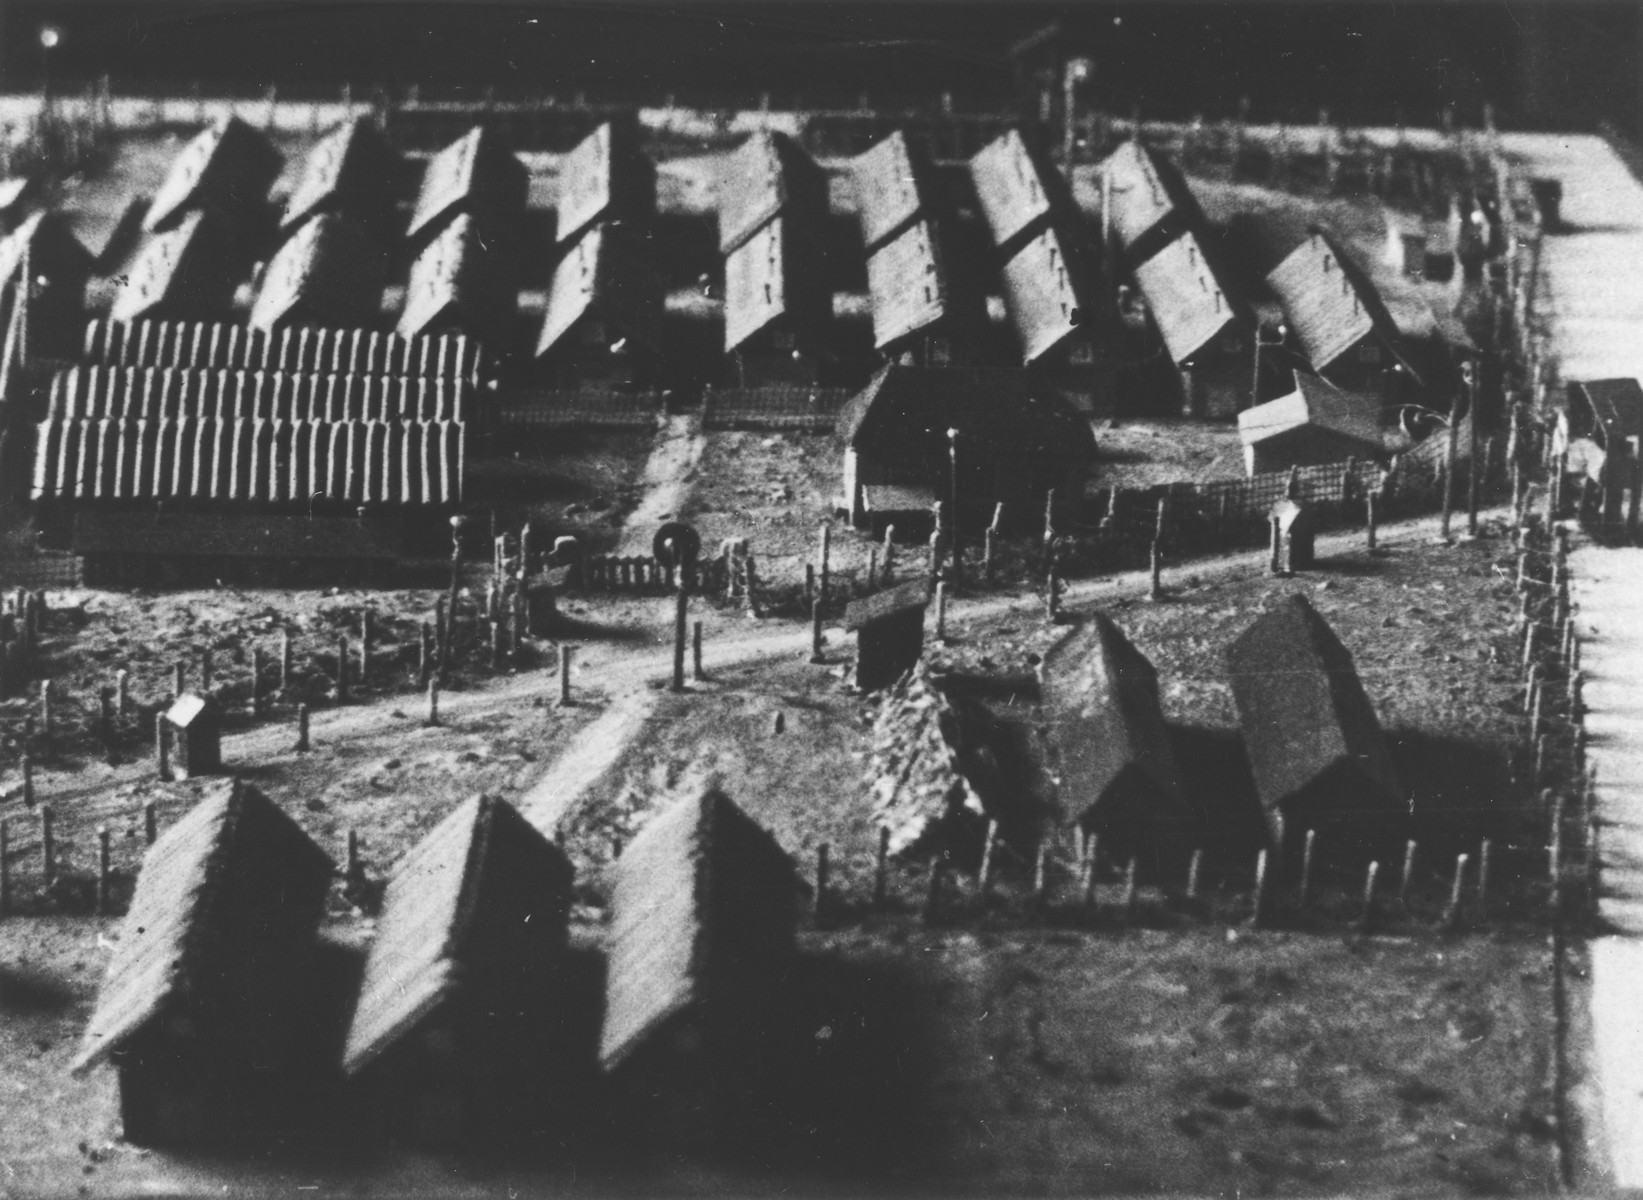 Scale model of the Beaune-la-Rolande internment camp created by Aba Sztern and another inmate.